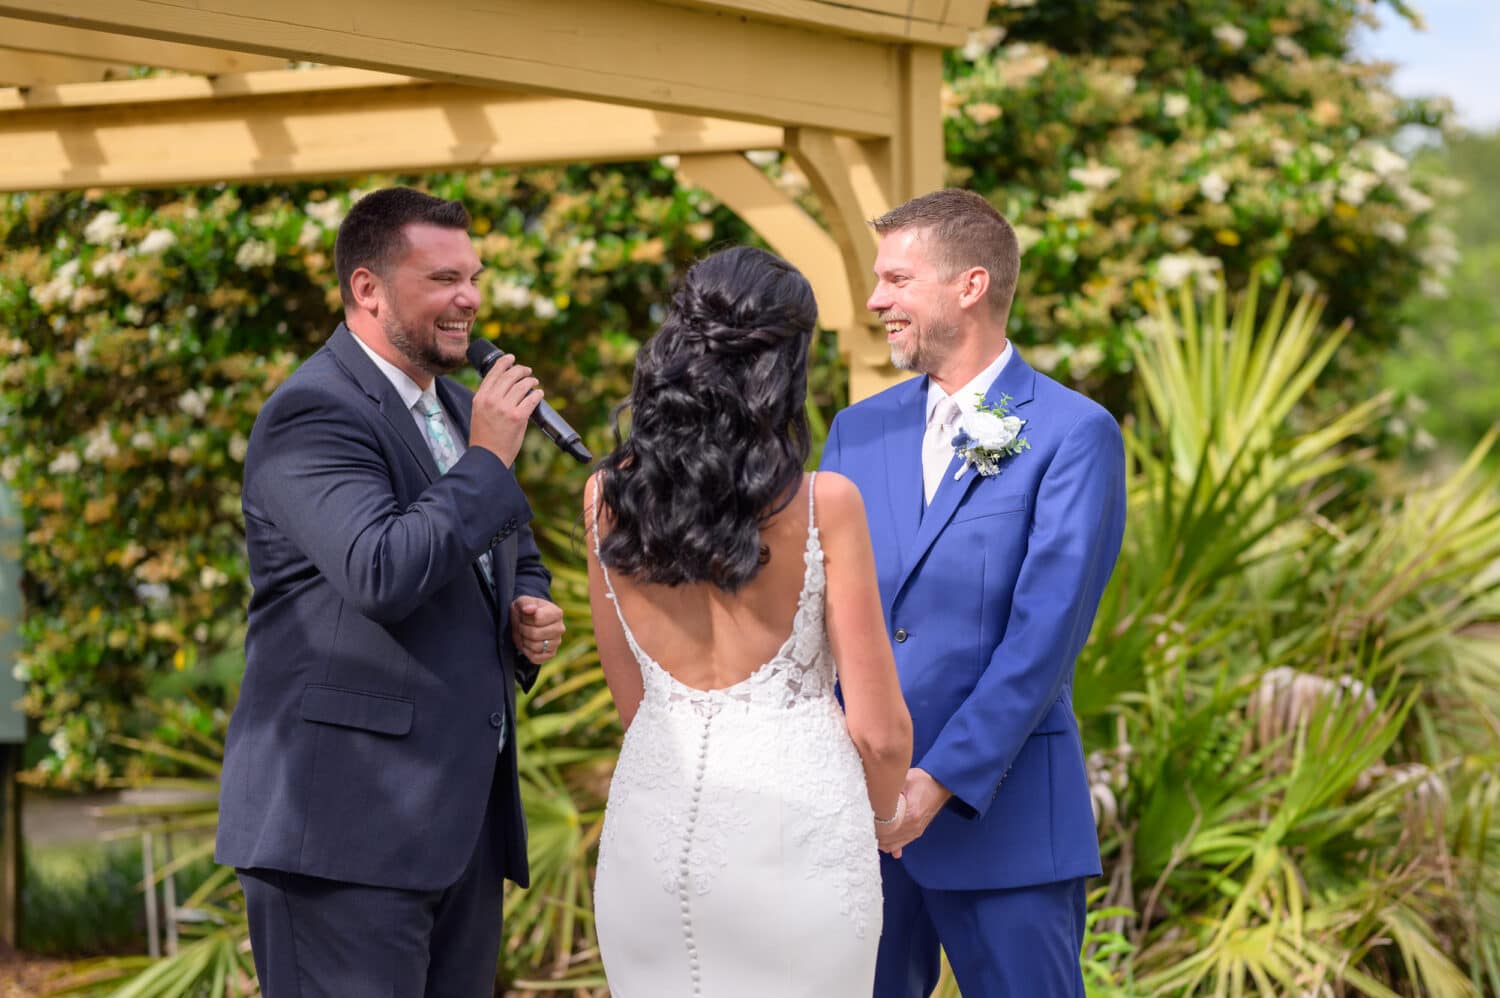 Lots of laughs during the ceremony - The Marina Inn